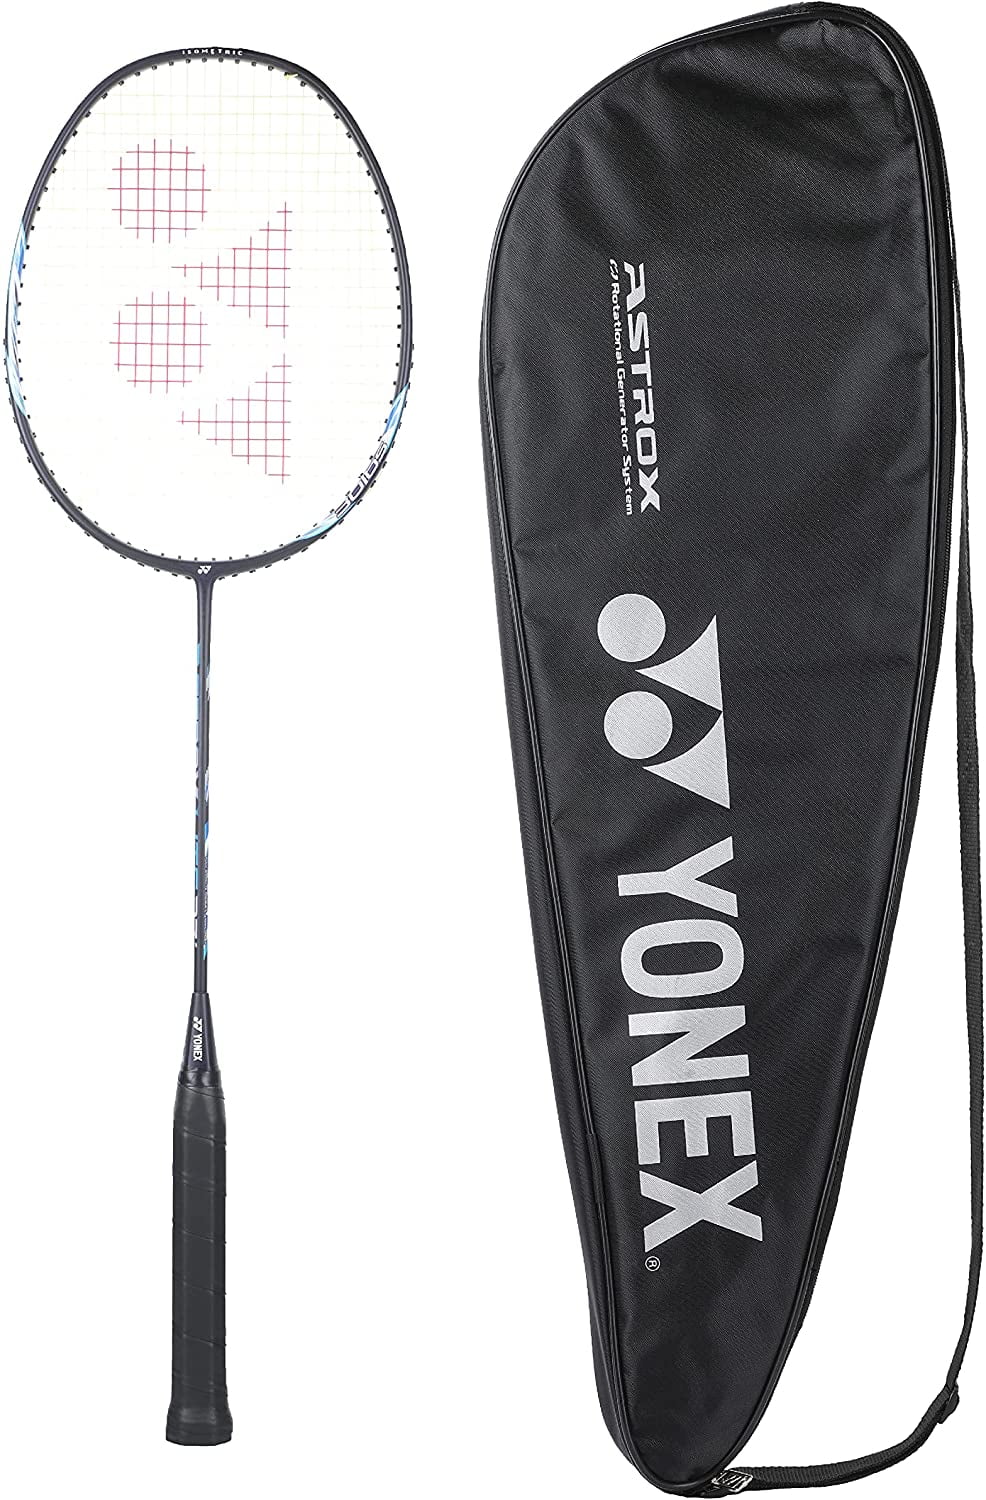 Details about   Zume Portable Badminton Set with Racket Pop Up Portable New Net Equipment Sport 